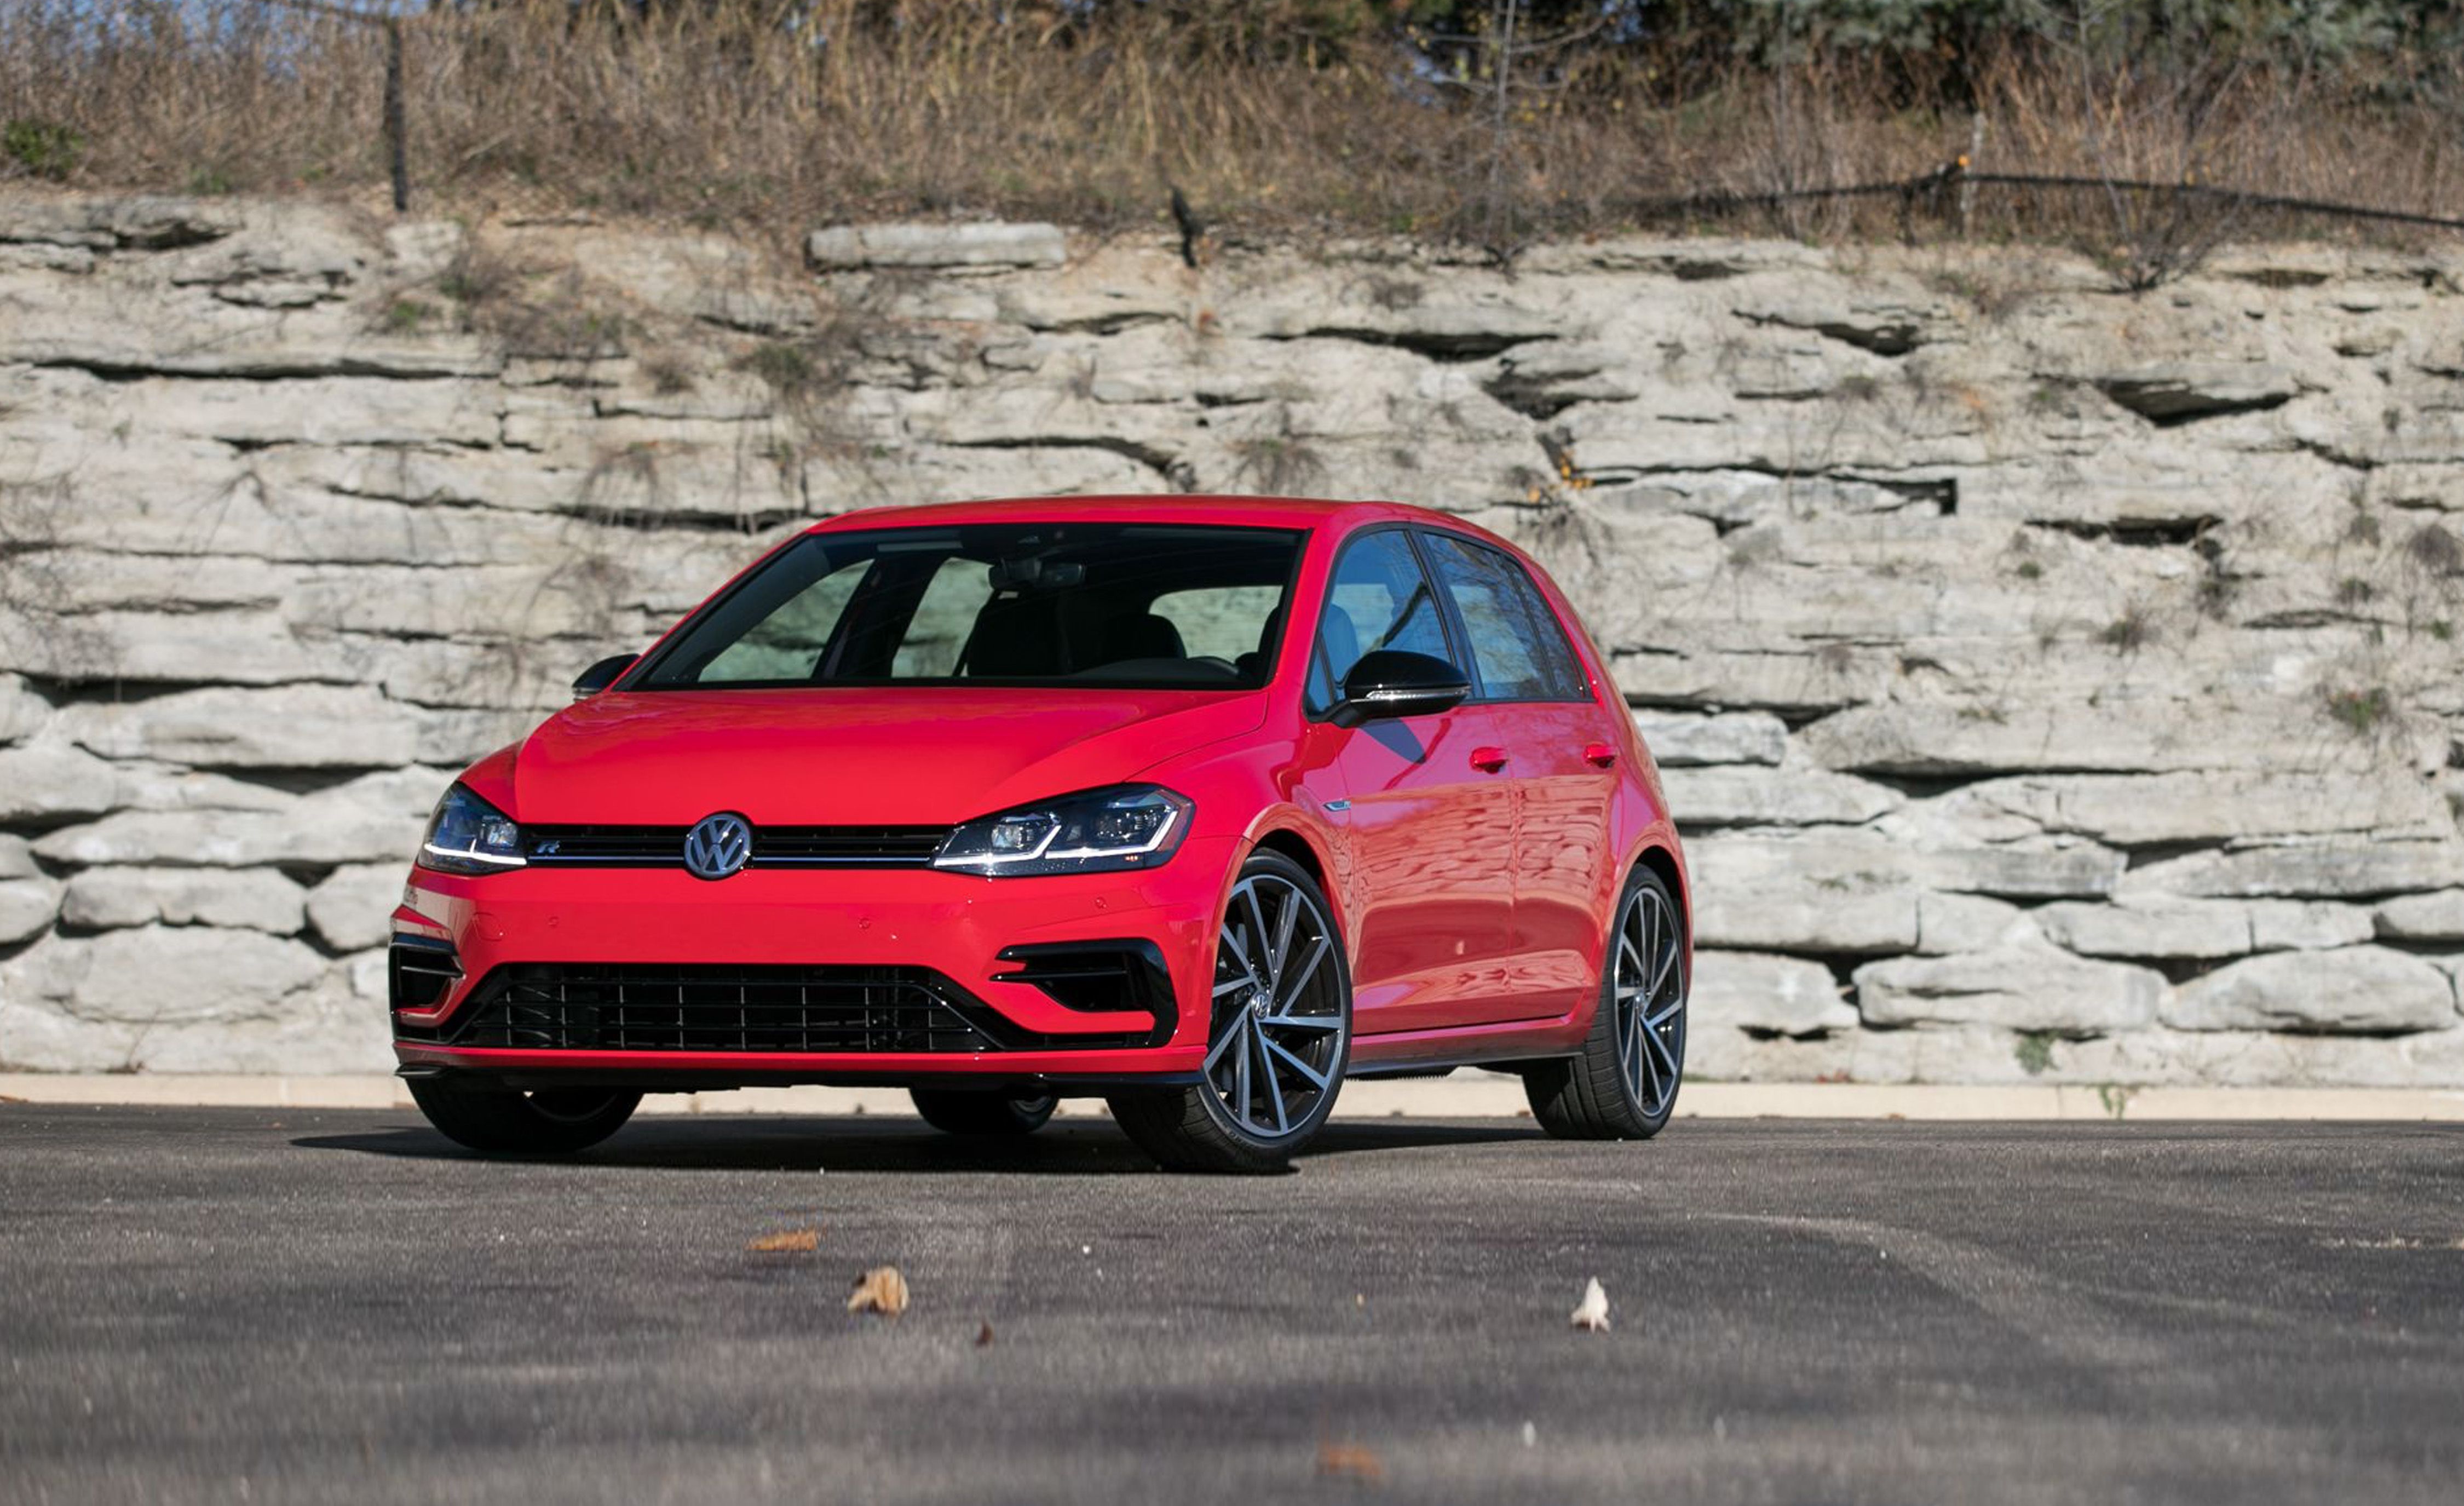 My Golf Mk7  My experience with a Volkswagen Mk7 GTI/R